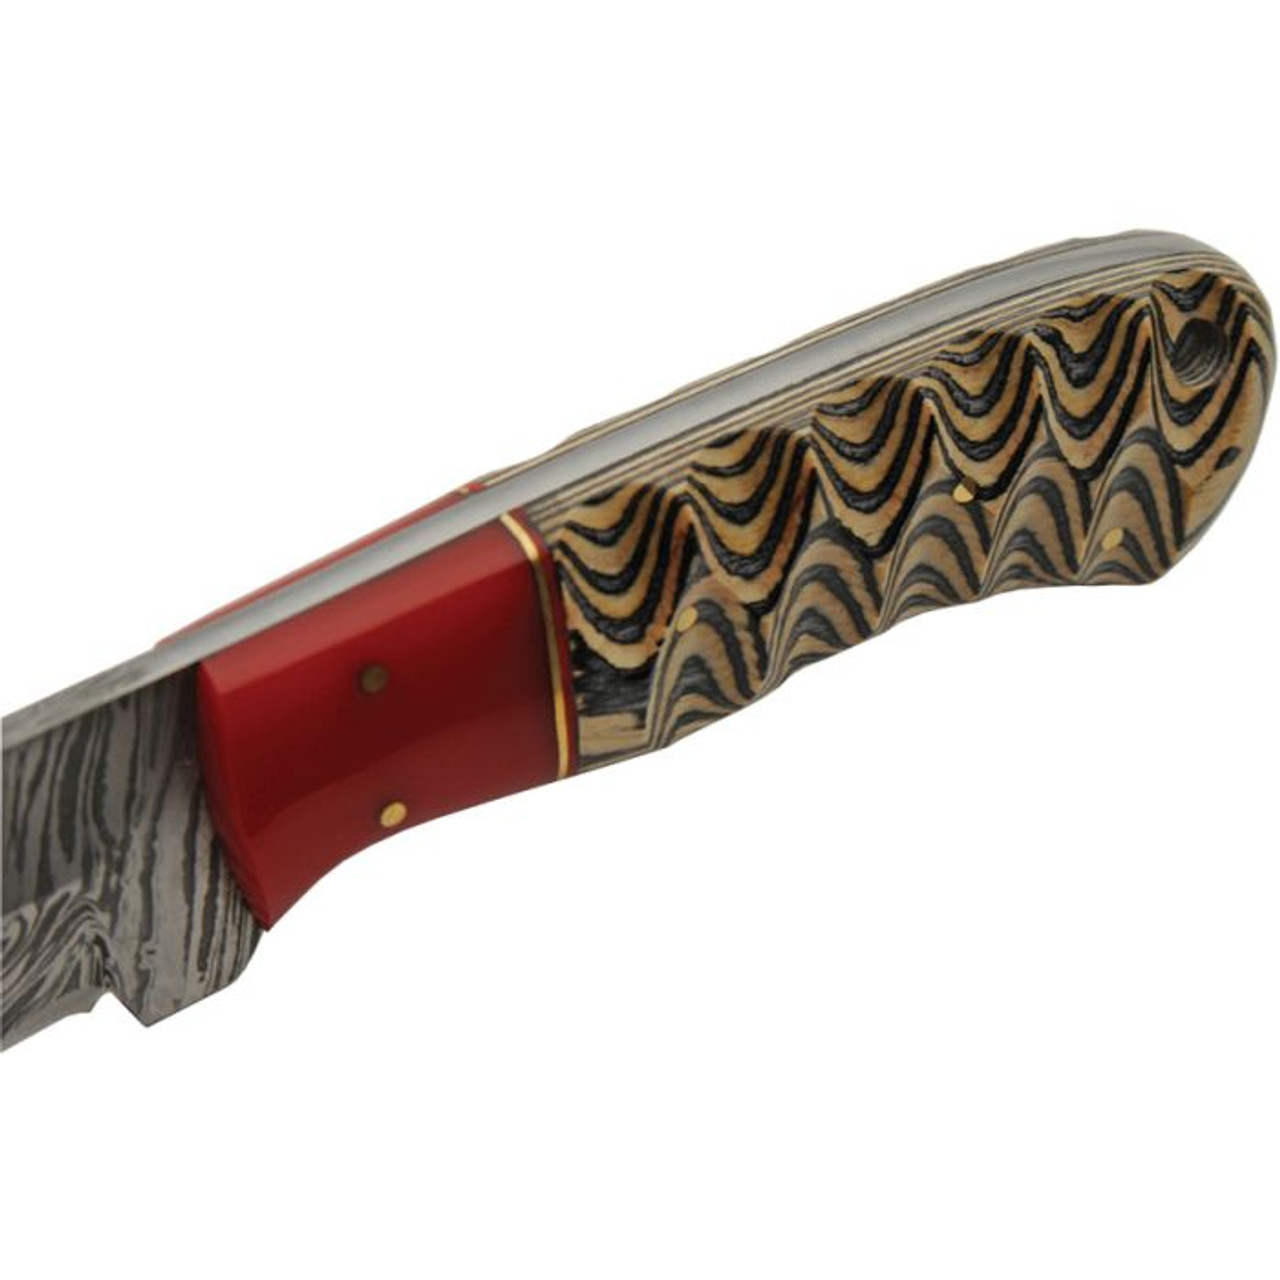 Damascus Knives Red Haze Kiri Hunter (DM1382) 4" Damascus Clip Point Plain Blade, Brown Sculpted Pakkawood Handle with a Red Resin Spacer, Brown Leather Belt Sheath